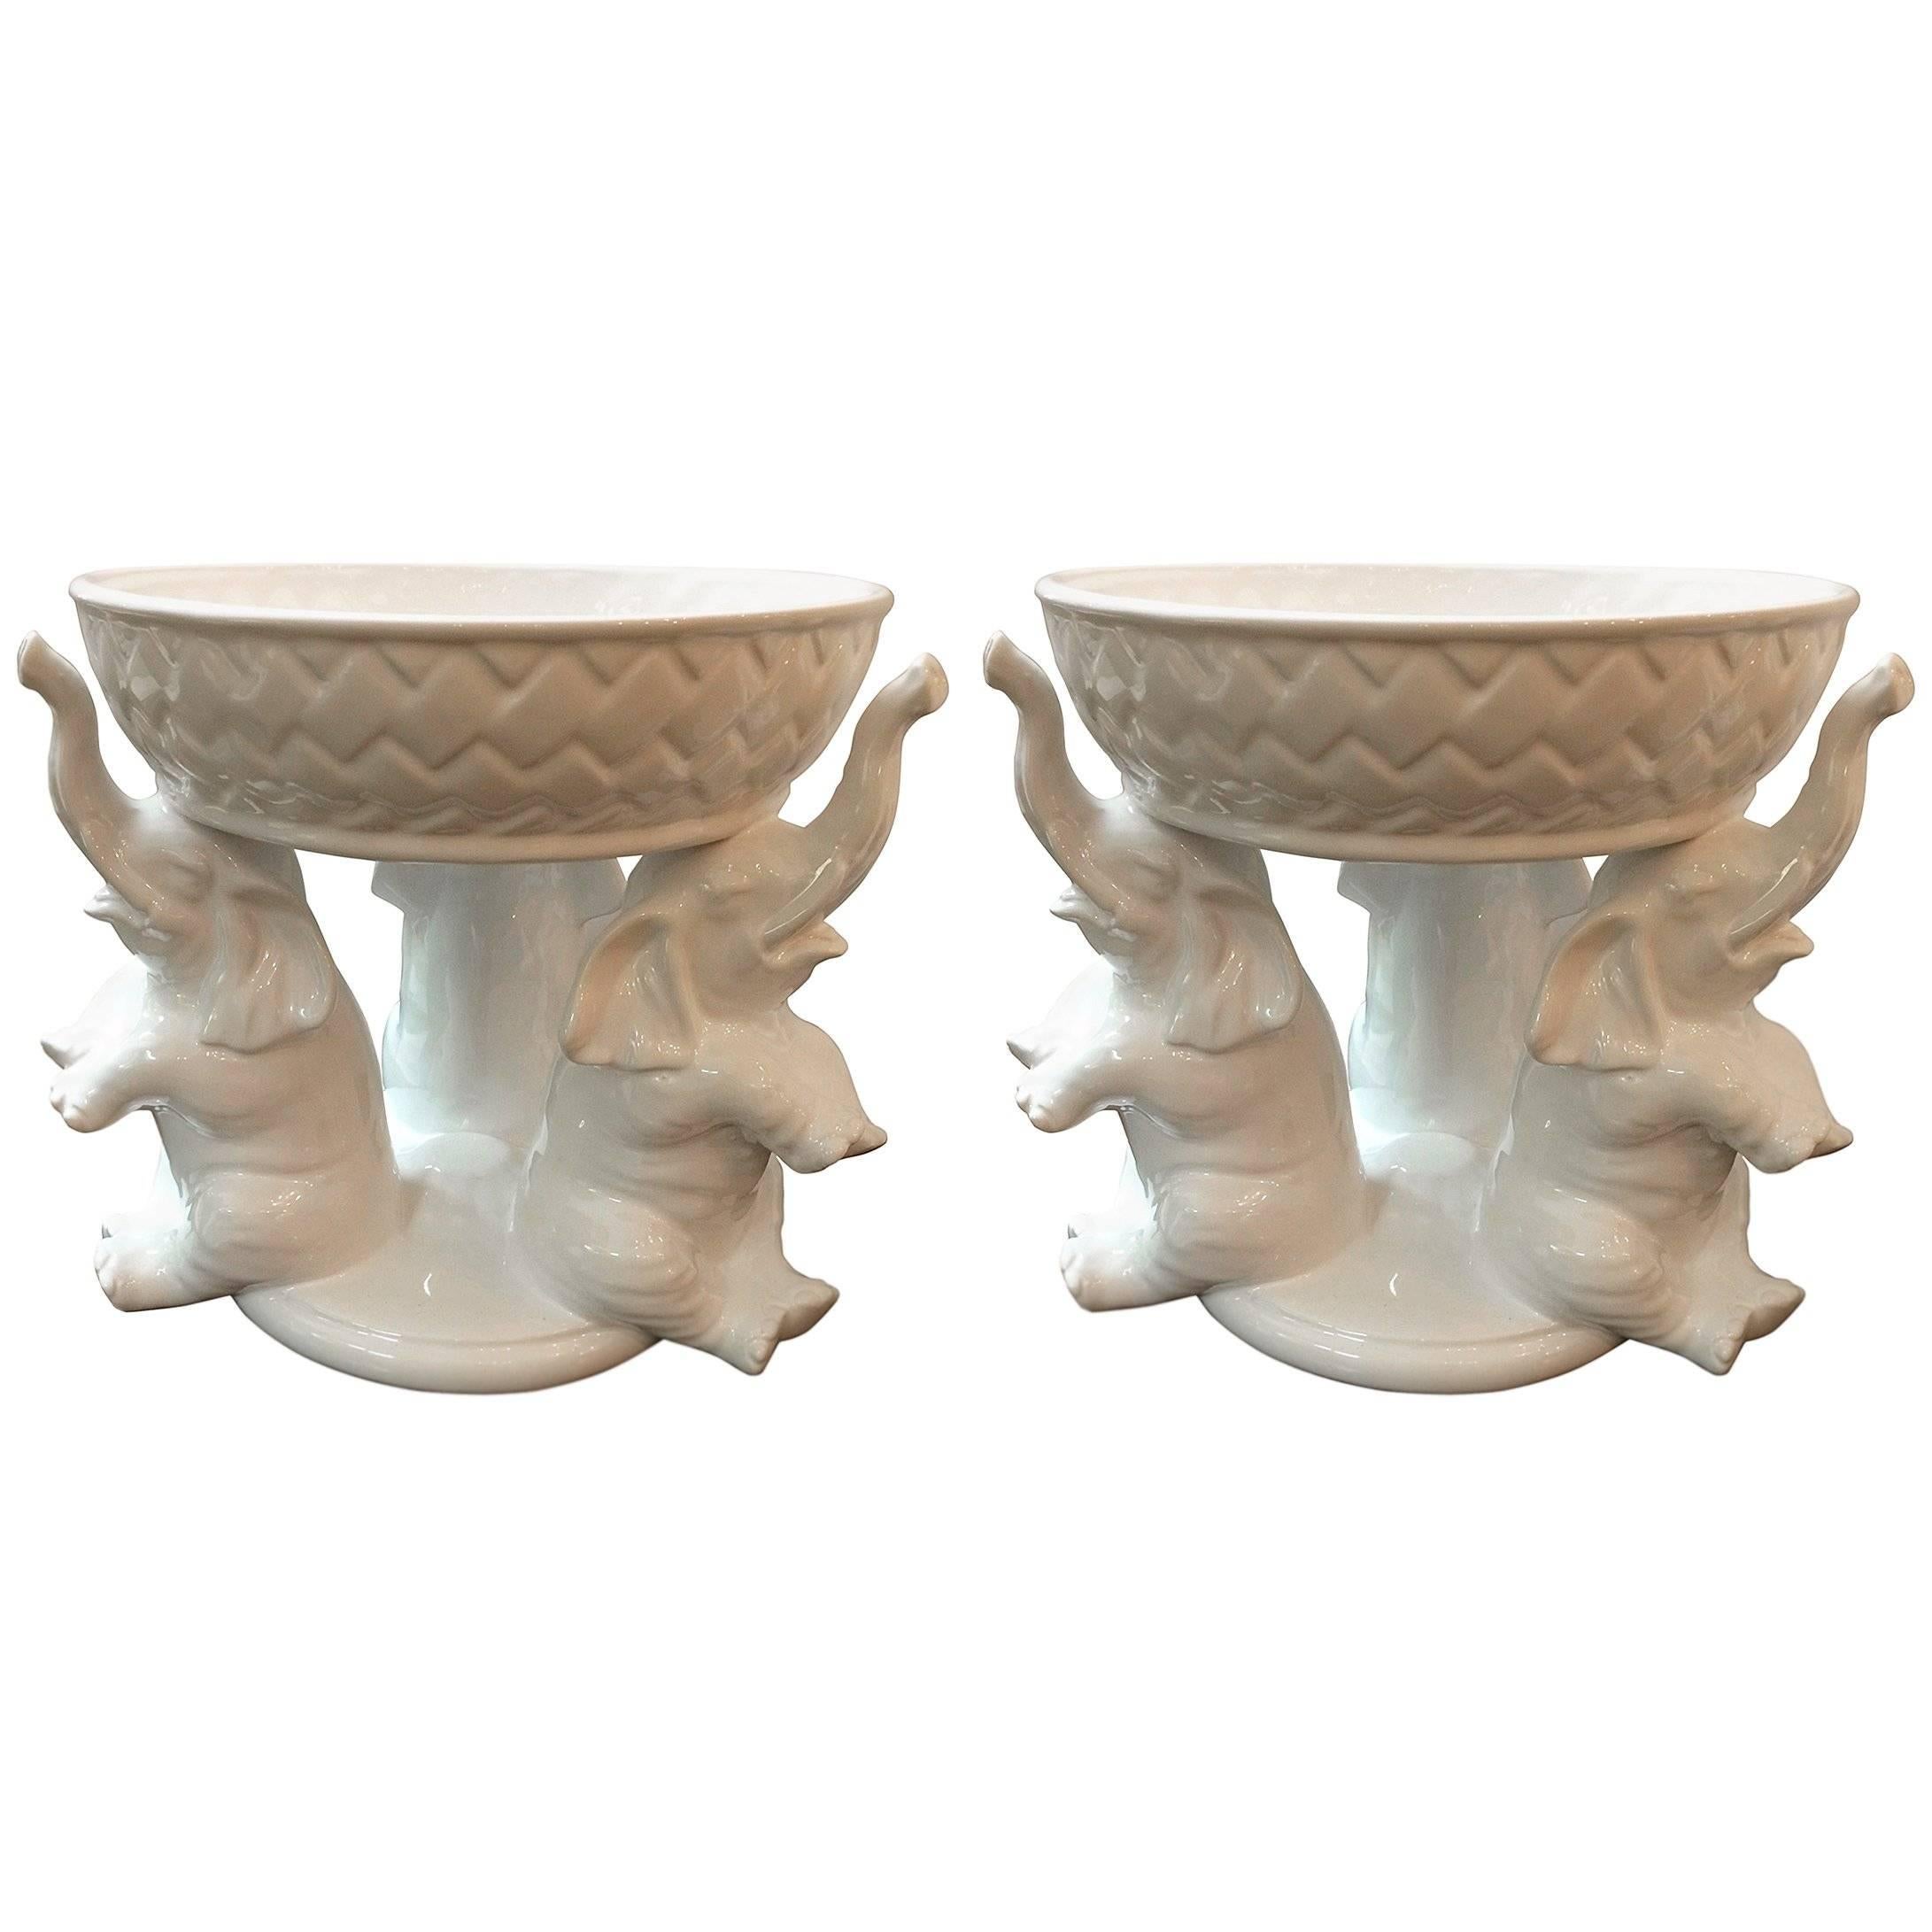 Pair of Whimsical Italian White Ceramic Pottery Centrepieces Bowls